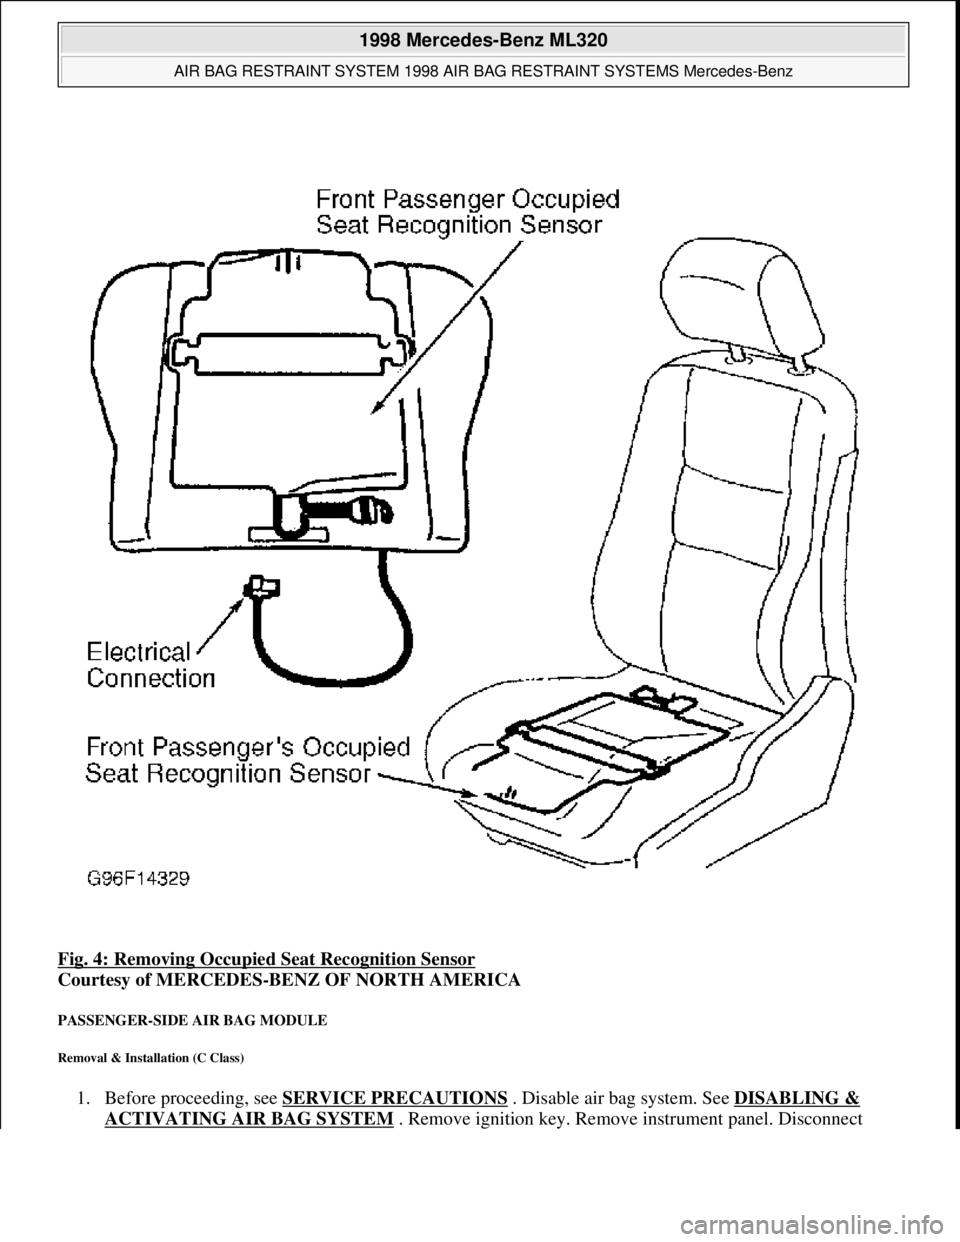 MERCEDES-BENZ ML350 1997  Complete User Guide Fig. 4: Removing Occupied Seat Recognition Sensor  
Courtesy of MERCEDES-BENZ OF NORTH AMERICA   
PASSENGER-SIDE AIR BAG MODULE 
Removal & Installation (C Class) 
1. Before proceeding, see SERVICE PRE